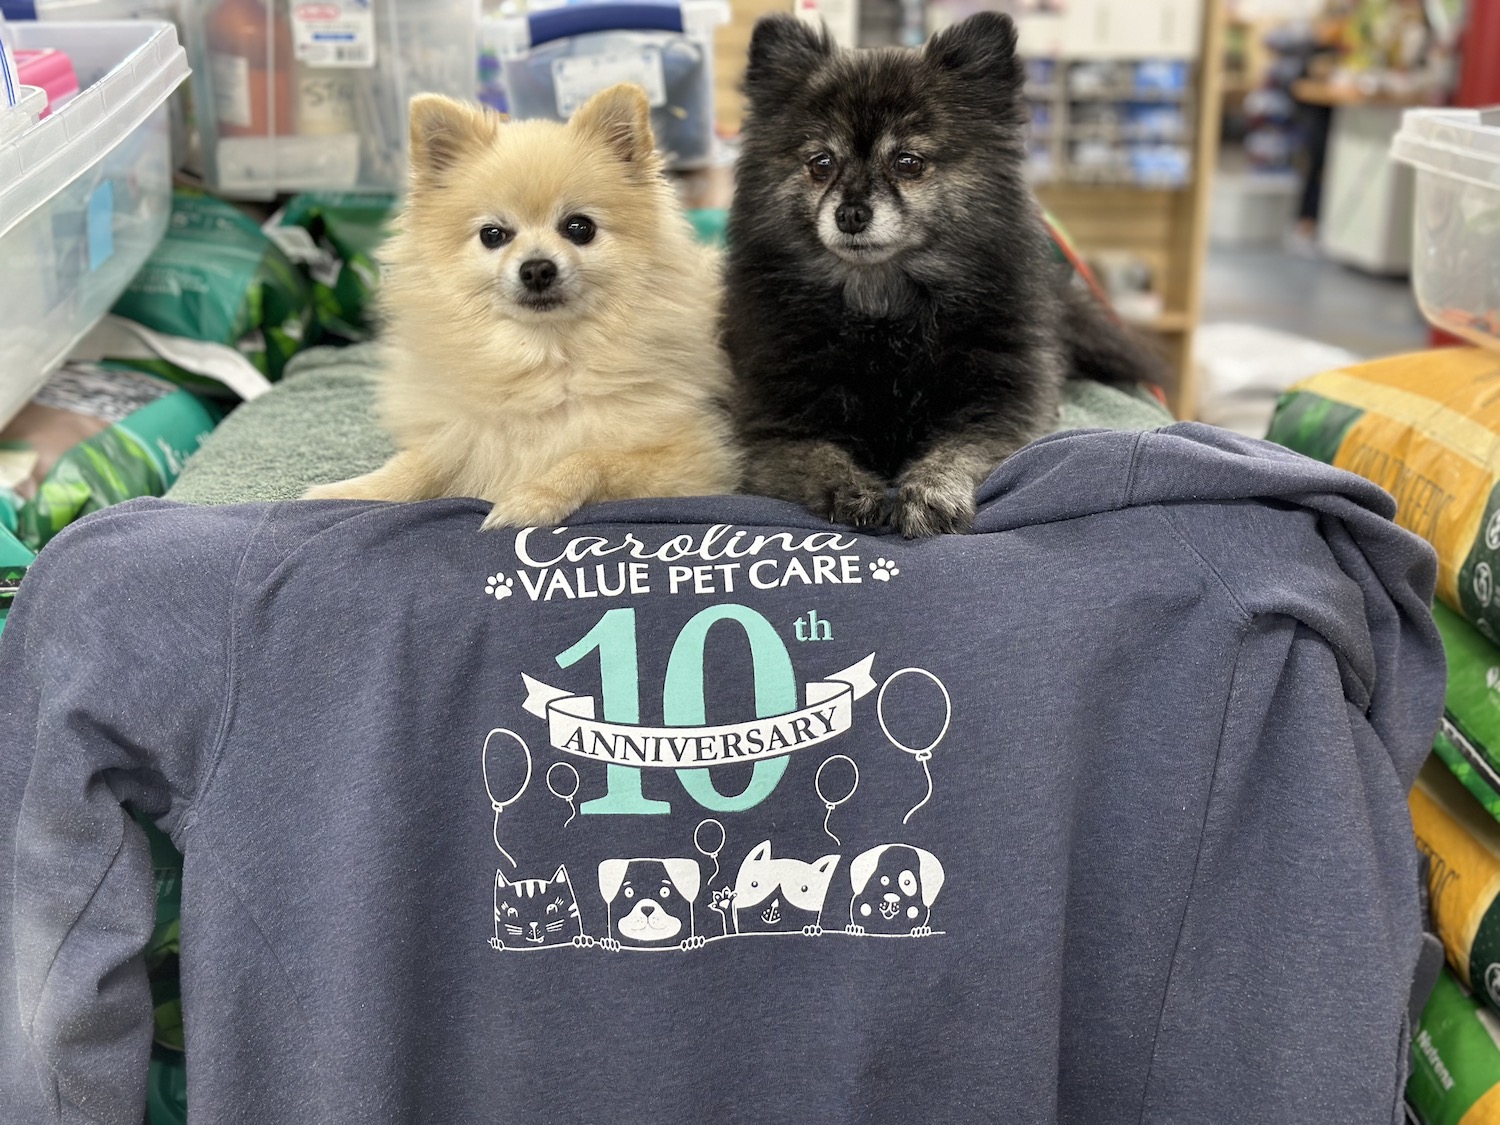 Two dogs on t shirt